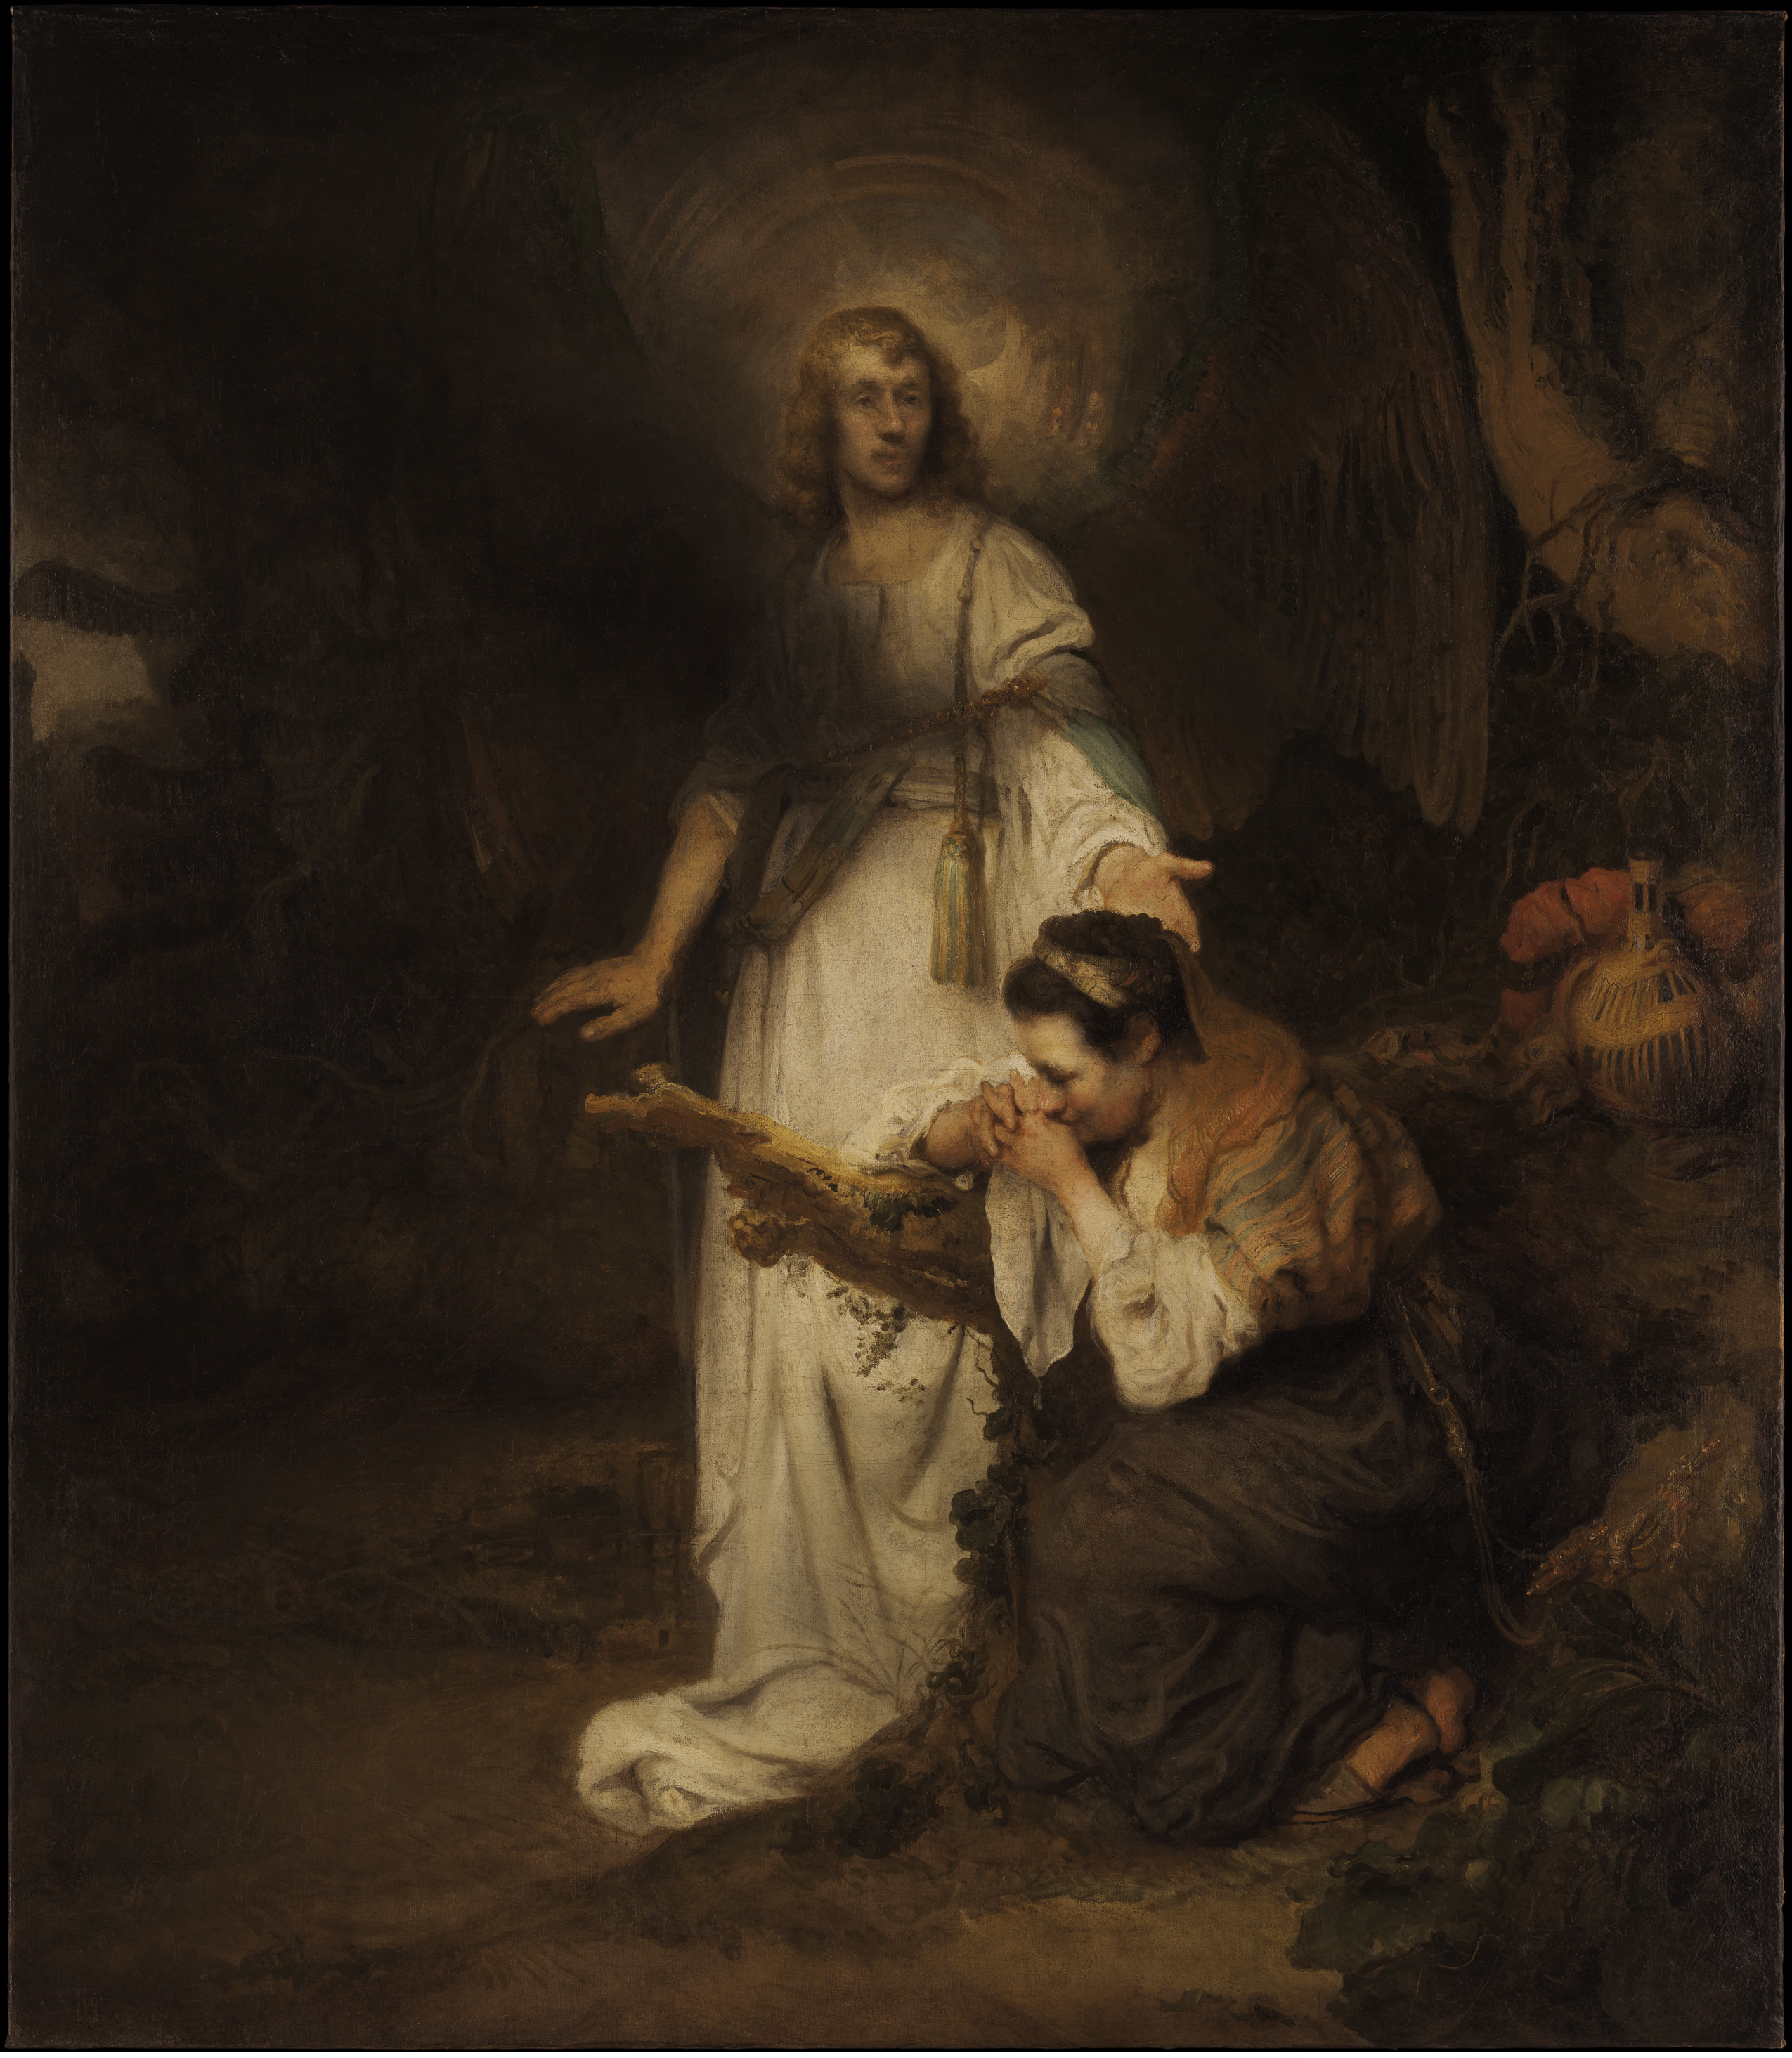 A Rembrandt painting featuring an angel and a woman in a forest.